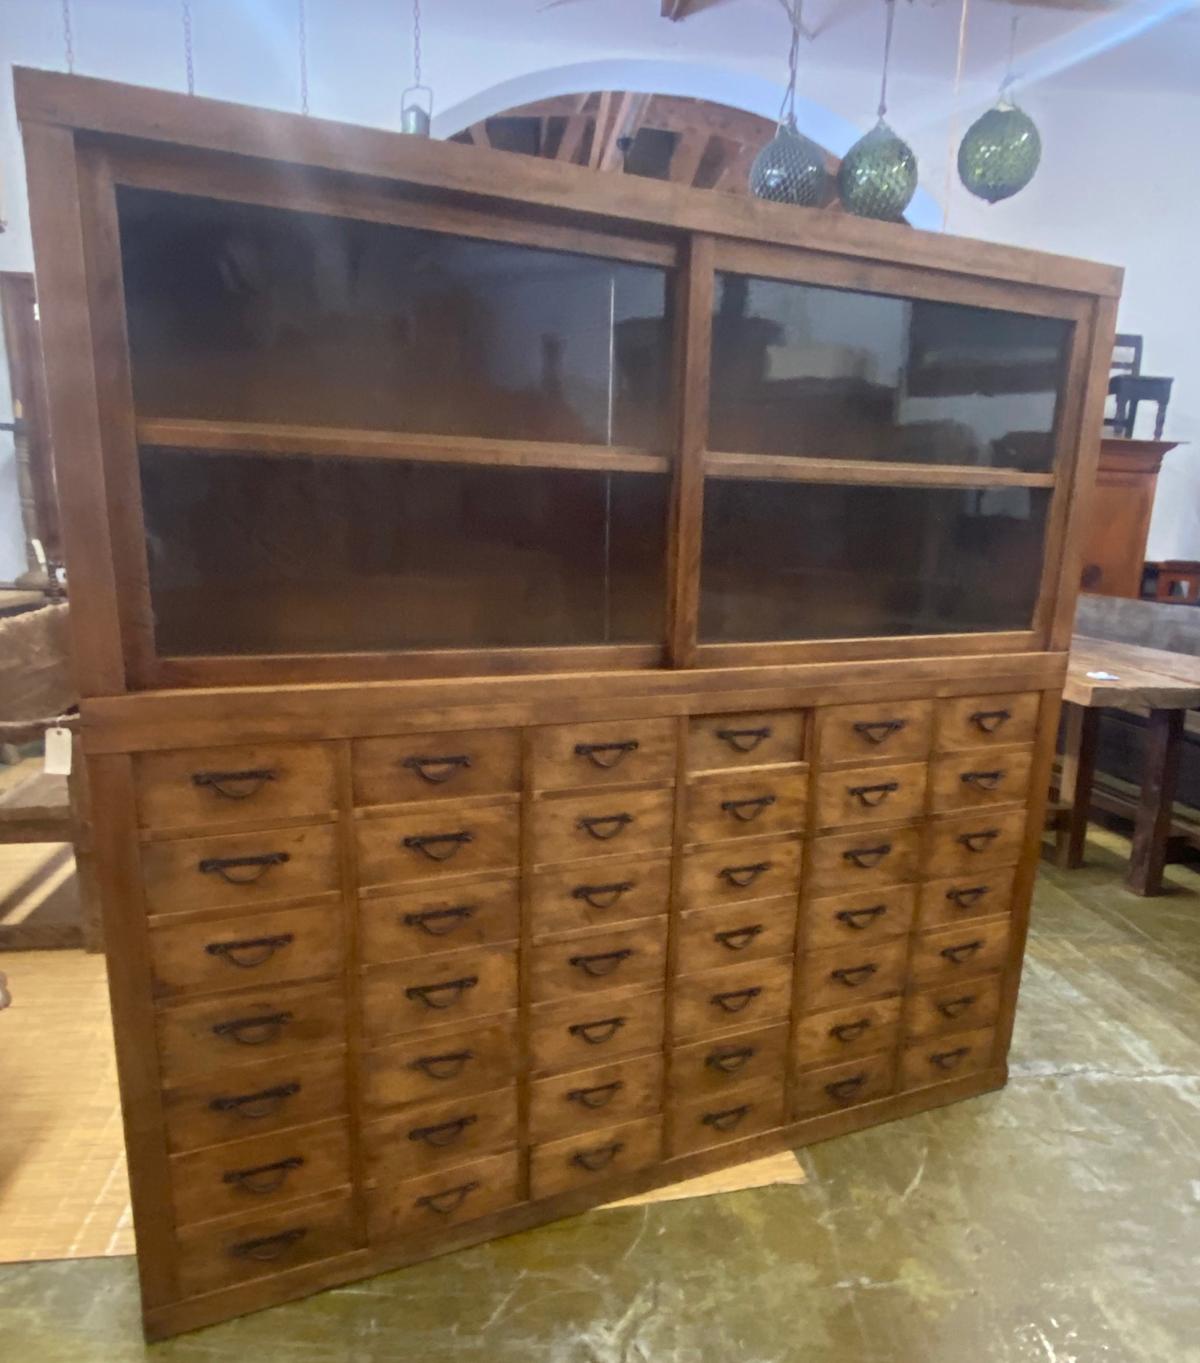 This cabinet is Japanese, Taisho to early Showa period (1920s-1930s). It has original wavy glass in its sliding glass doors in the upper portion of the cabinet, which was used for display, and has a shelf.
The lower portion is made up of 42 perfect